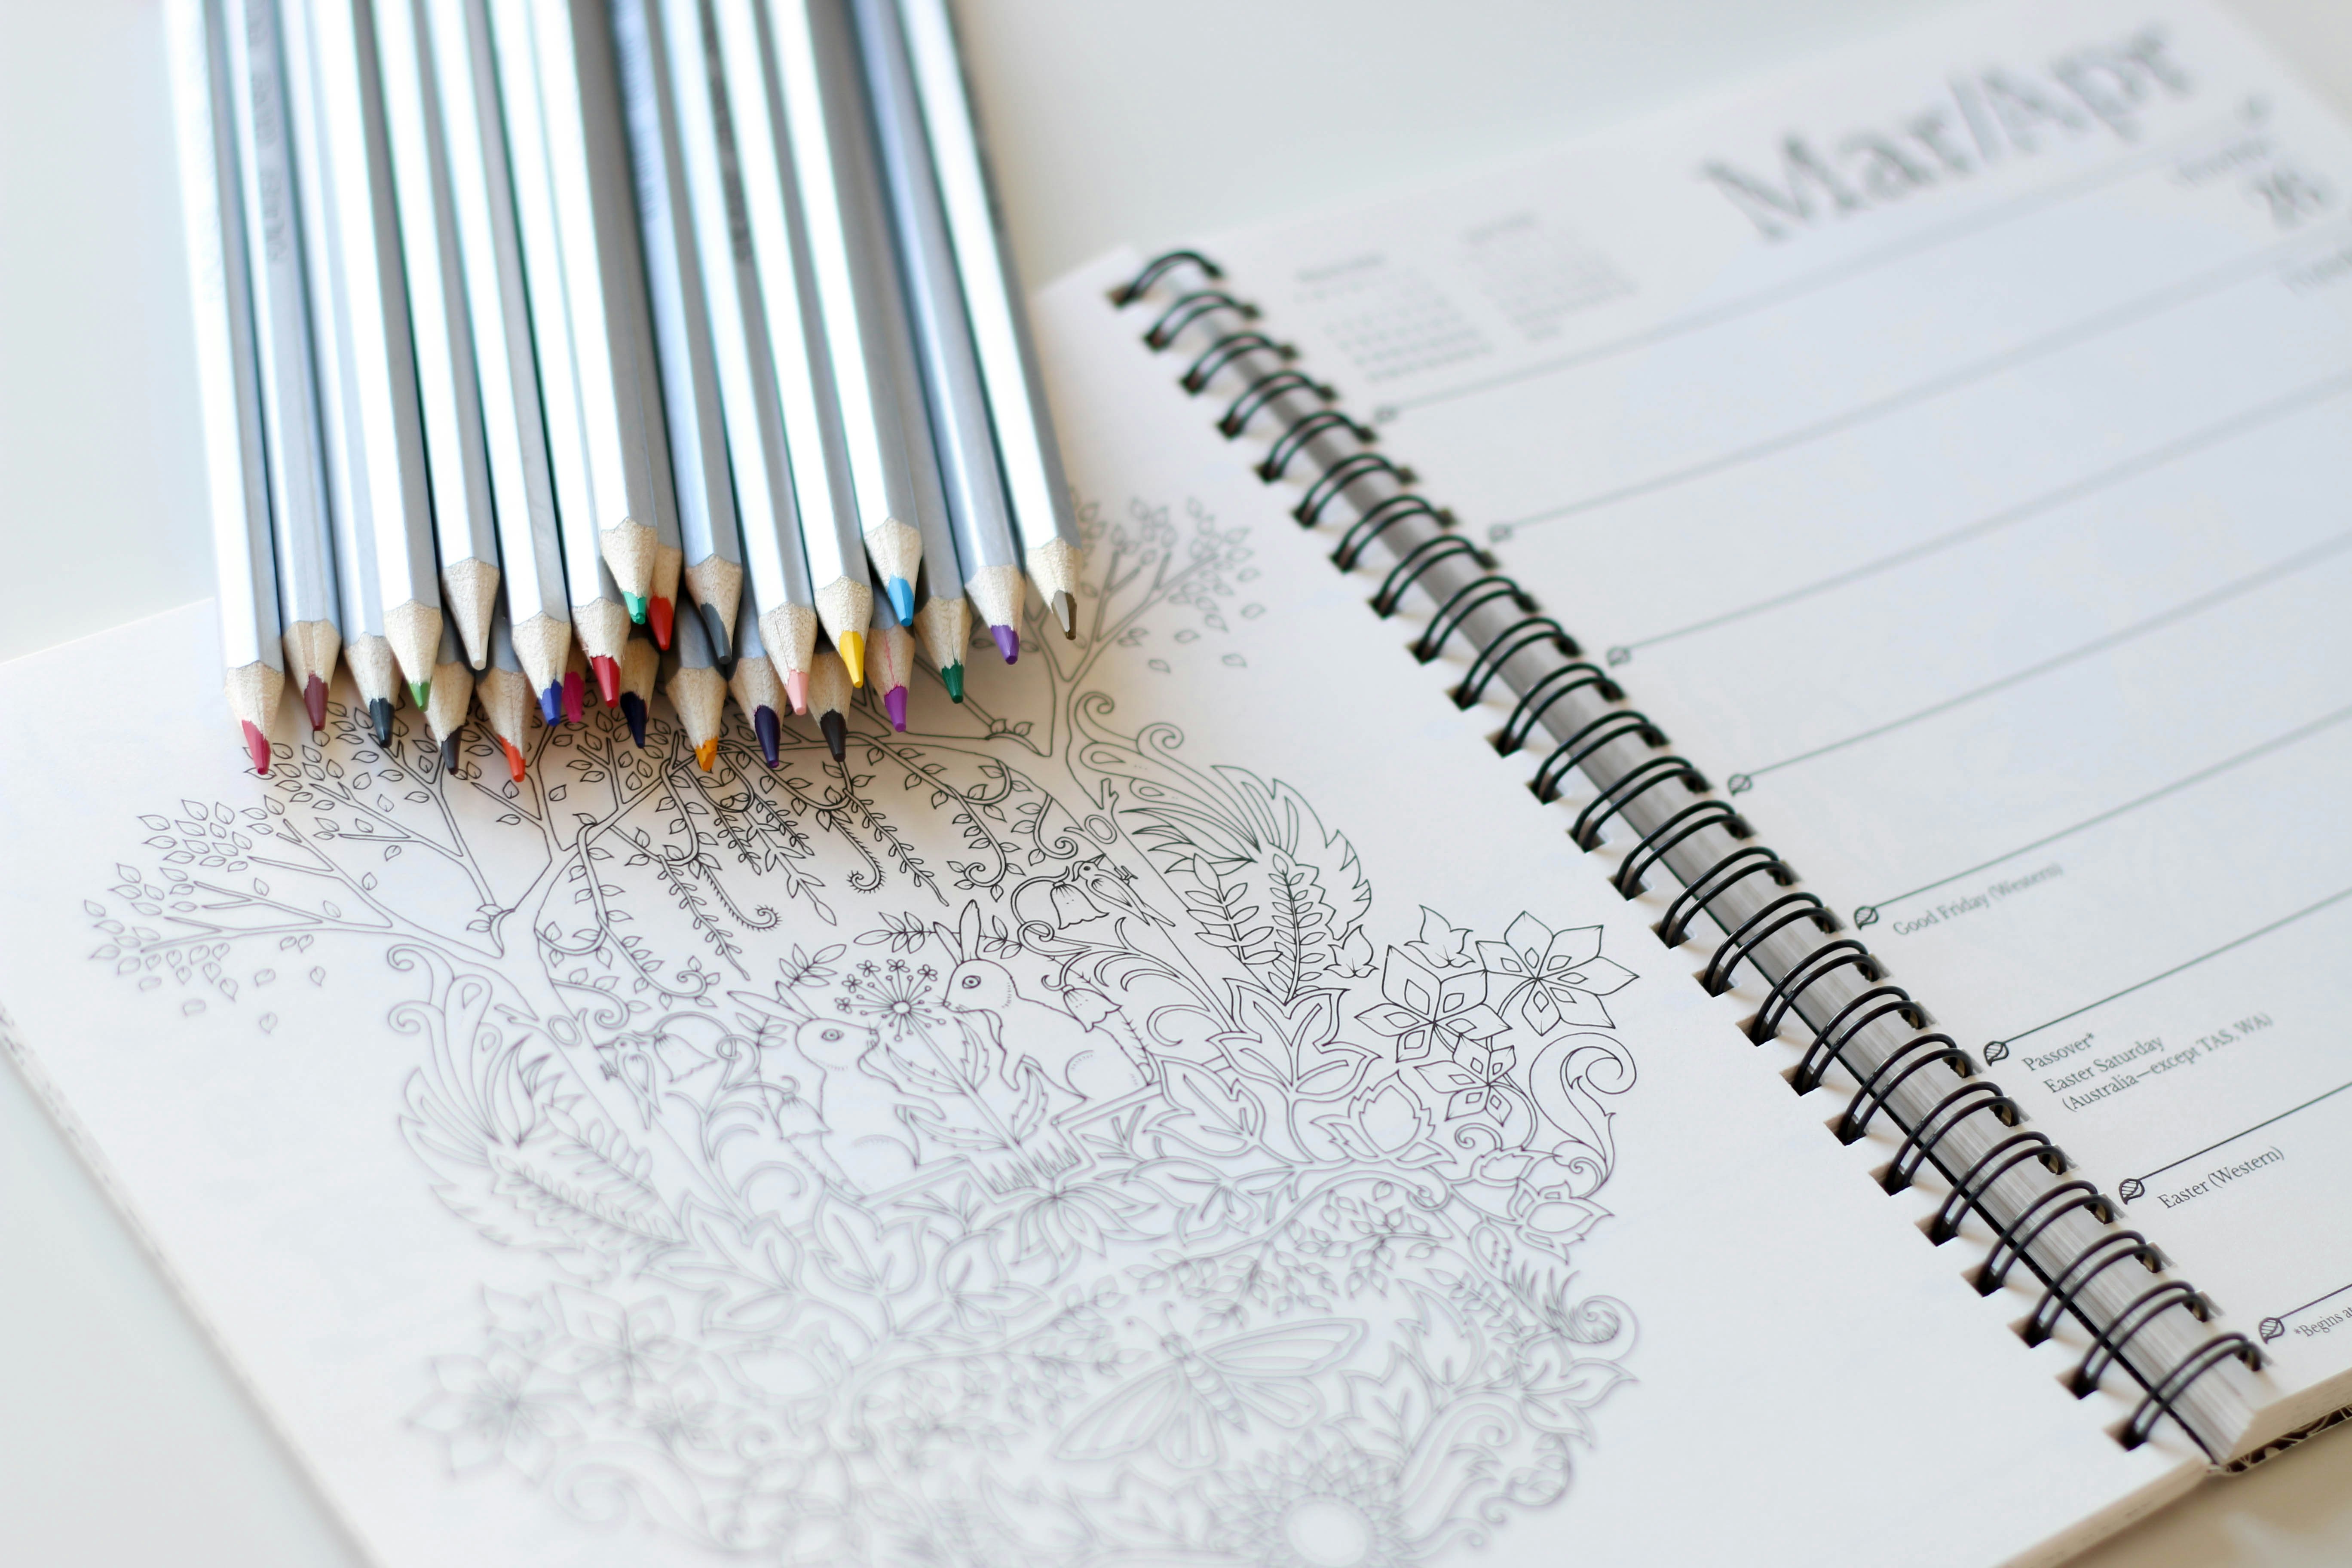 a group of colored pencils on a spiral bound notebook